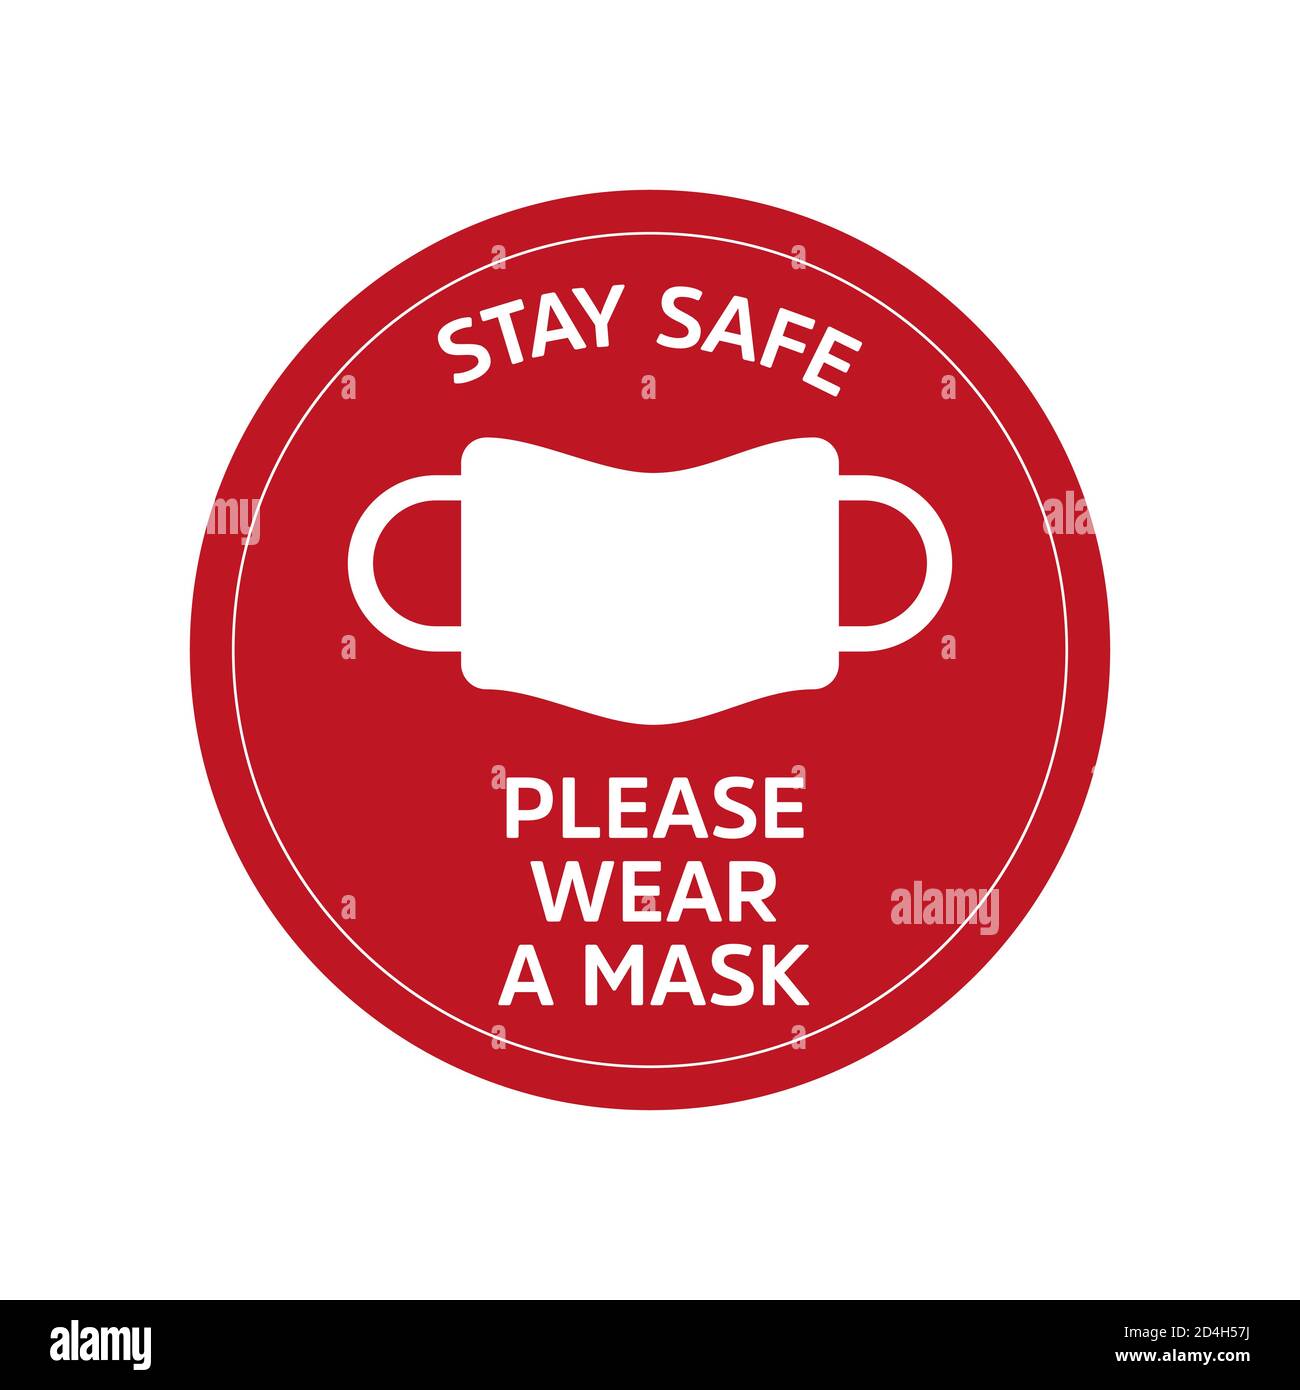 Please wear mask icon vector signage. Stay safe. Eps 10 Stock Vector